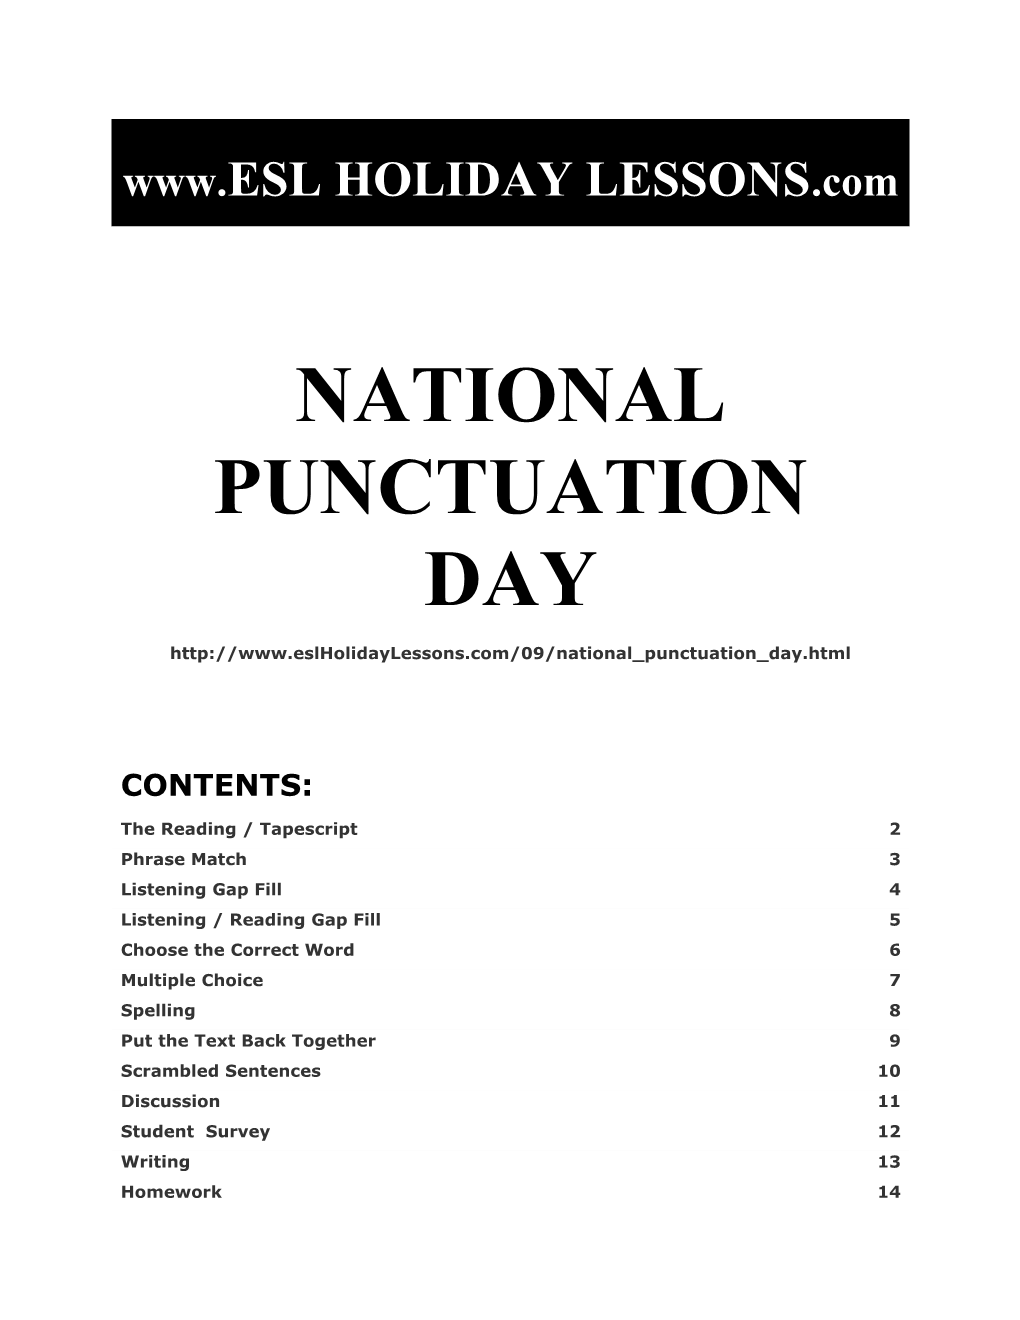 Holiday Lessons - Punctuation Day